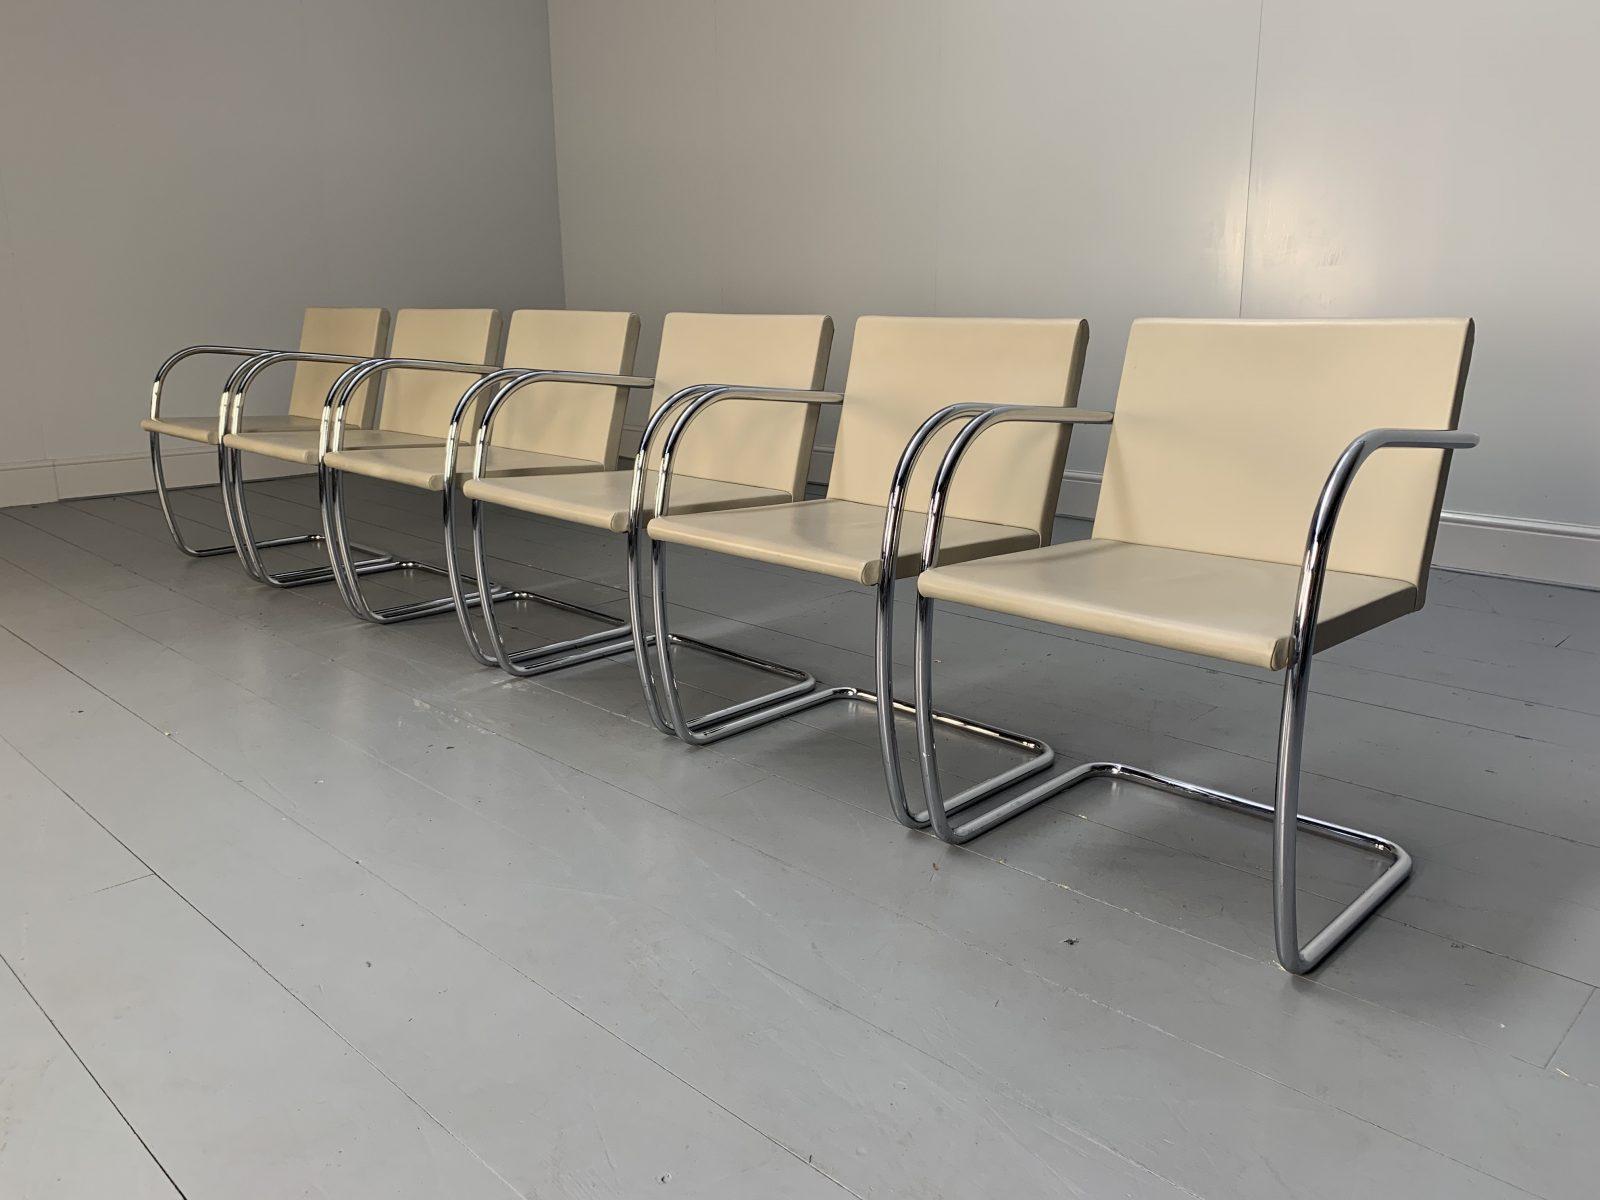 This is a sublime, immaculately-presented suite of 6 “Brno” Tubular-Bar Armchairs in Pale Ivory Leather, manufactured by the leading Furniture manufacturer, Knoll Studio.

In a world of temporary pleasures, Knoll Studio creates beautiful furniture